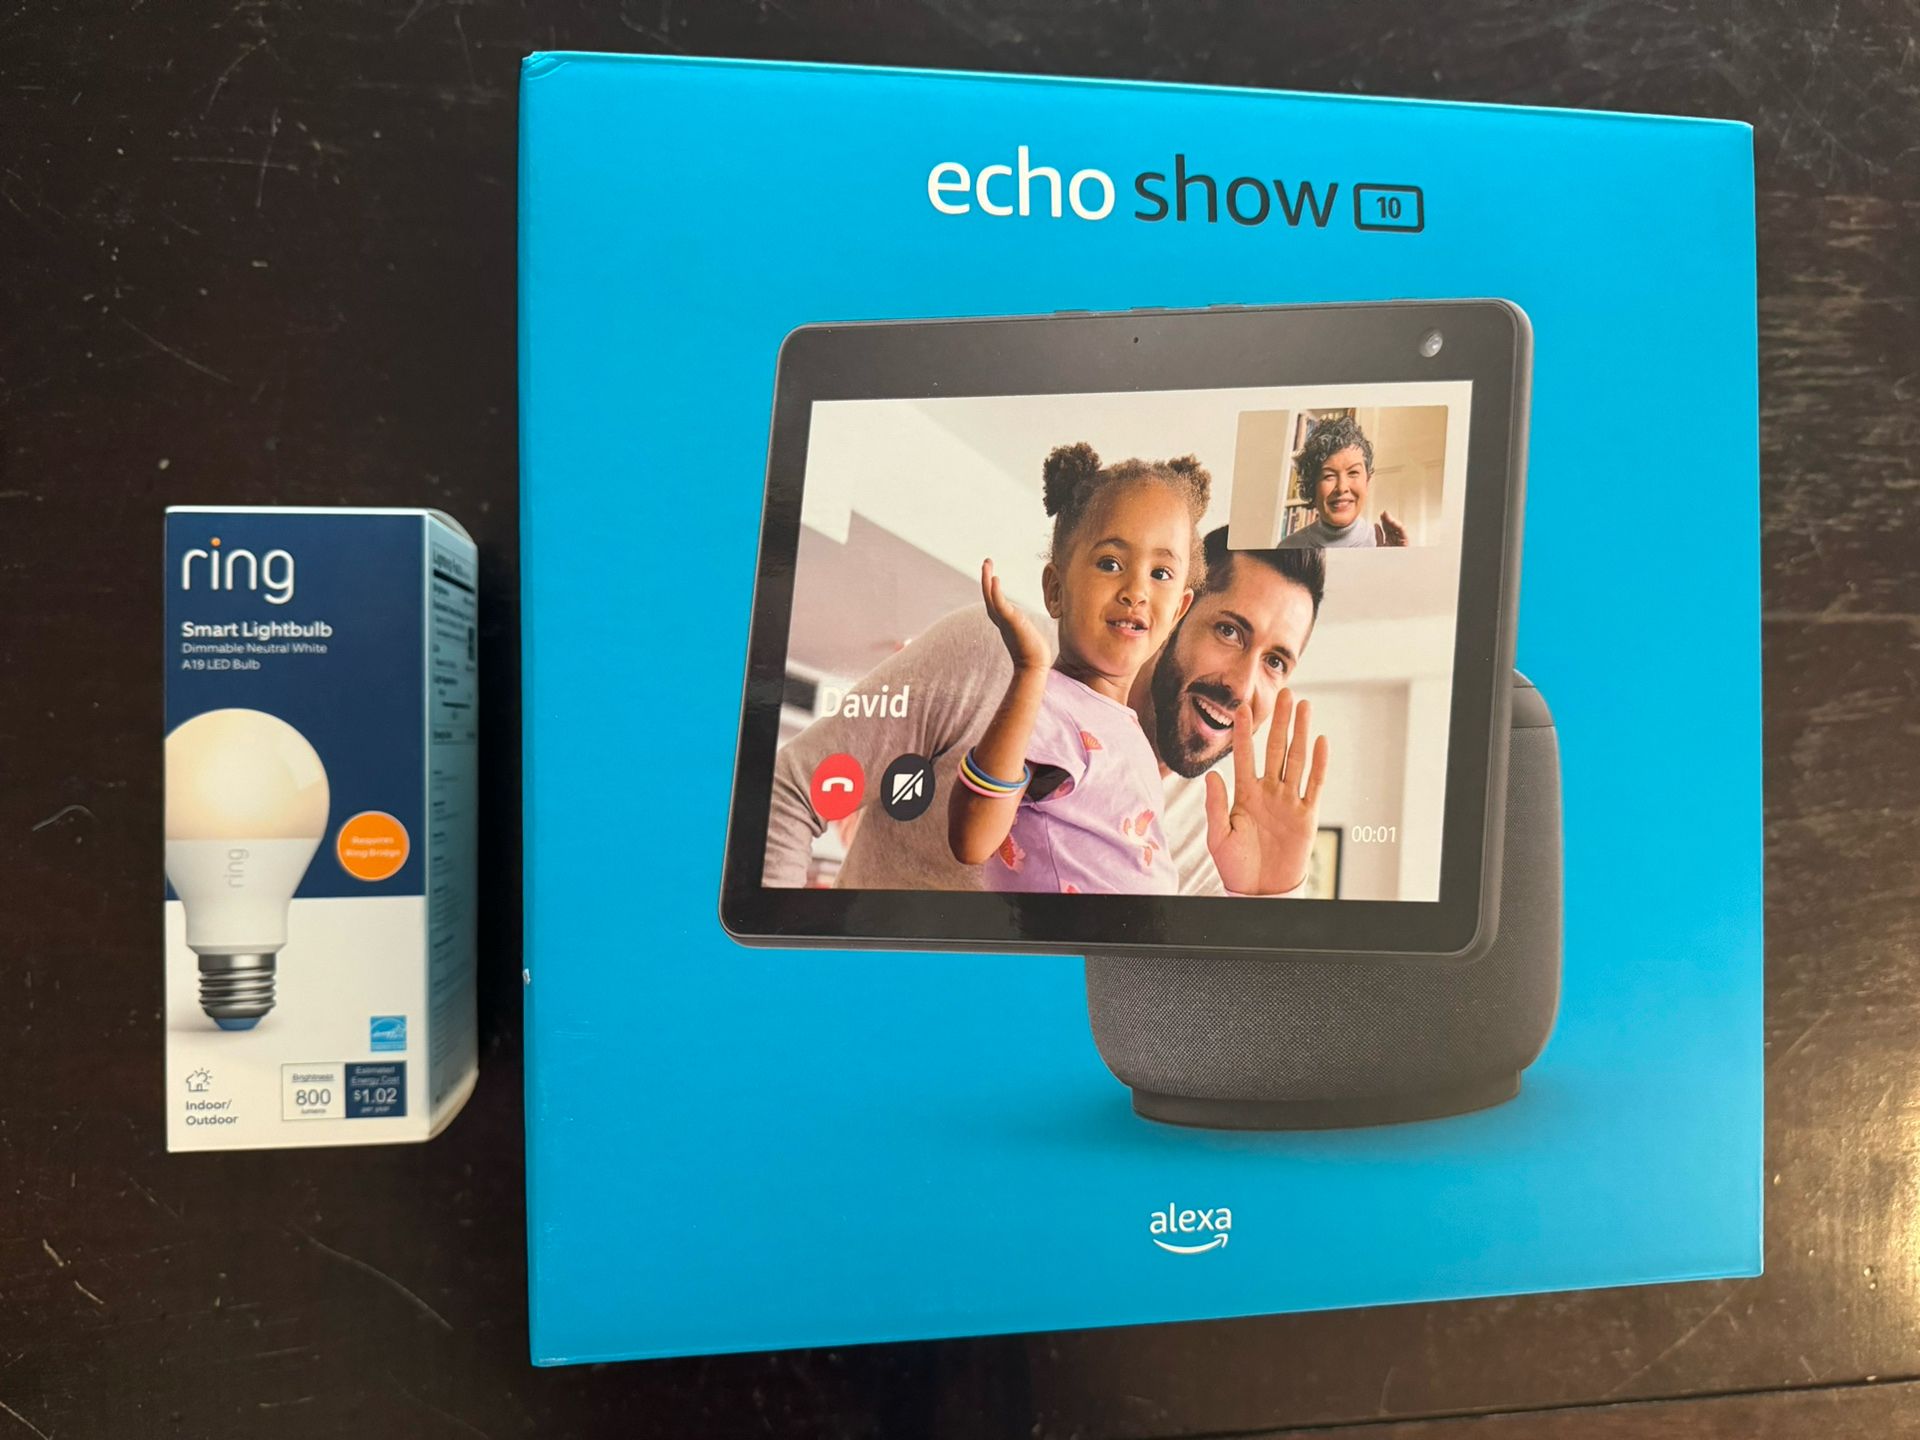 Amazon Echo Show 10 BRAND NEW Box Opened And NEW Ring Smart Light Bulb